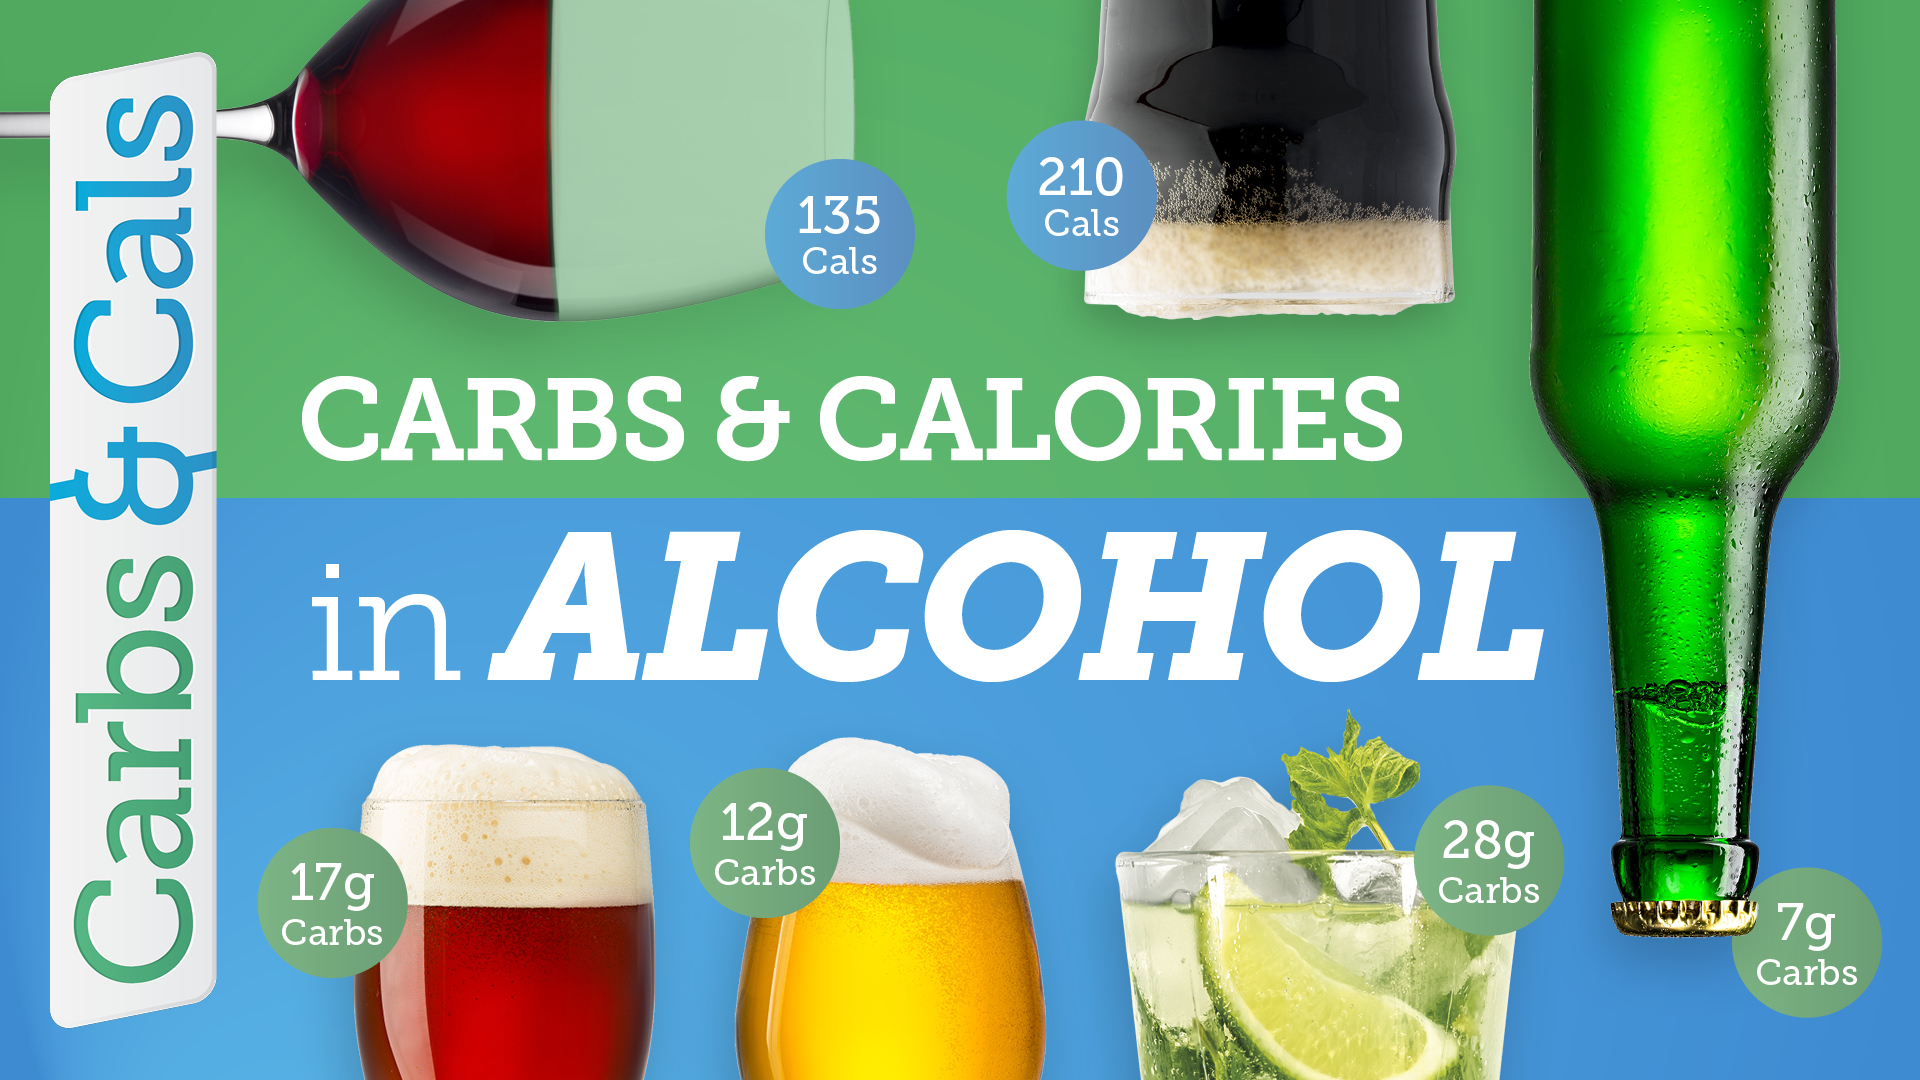 Video - Carbs & Calories in Alcohol Drinks